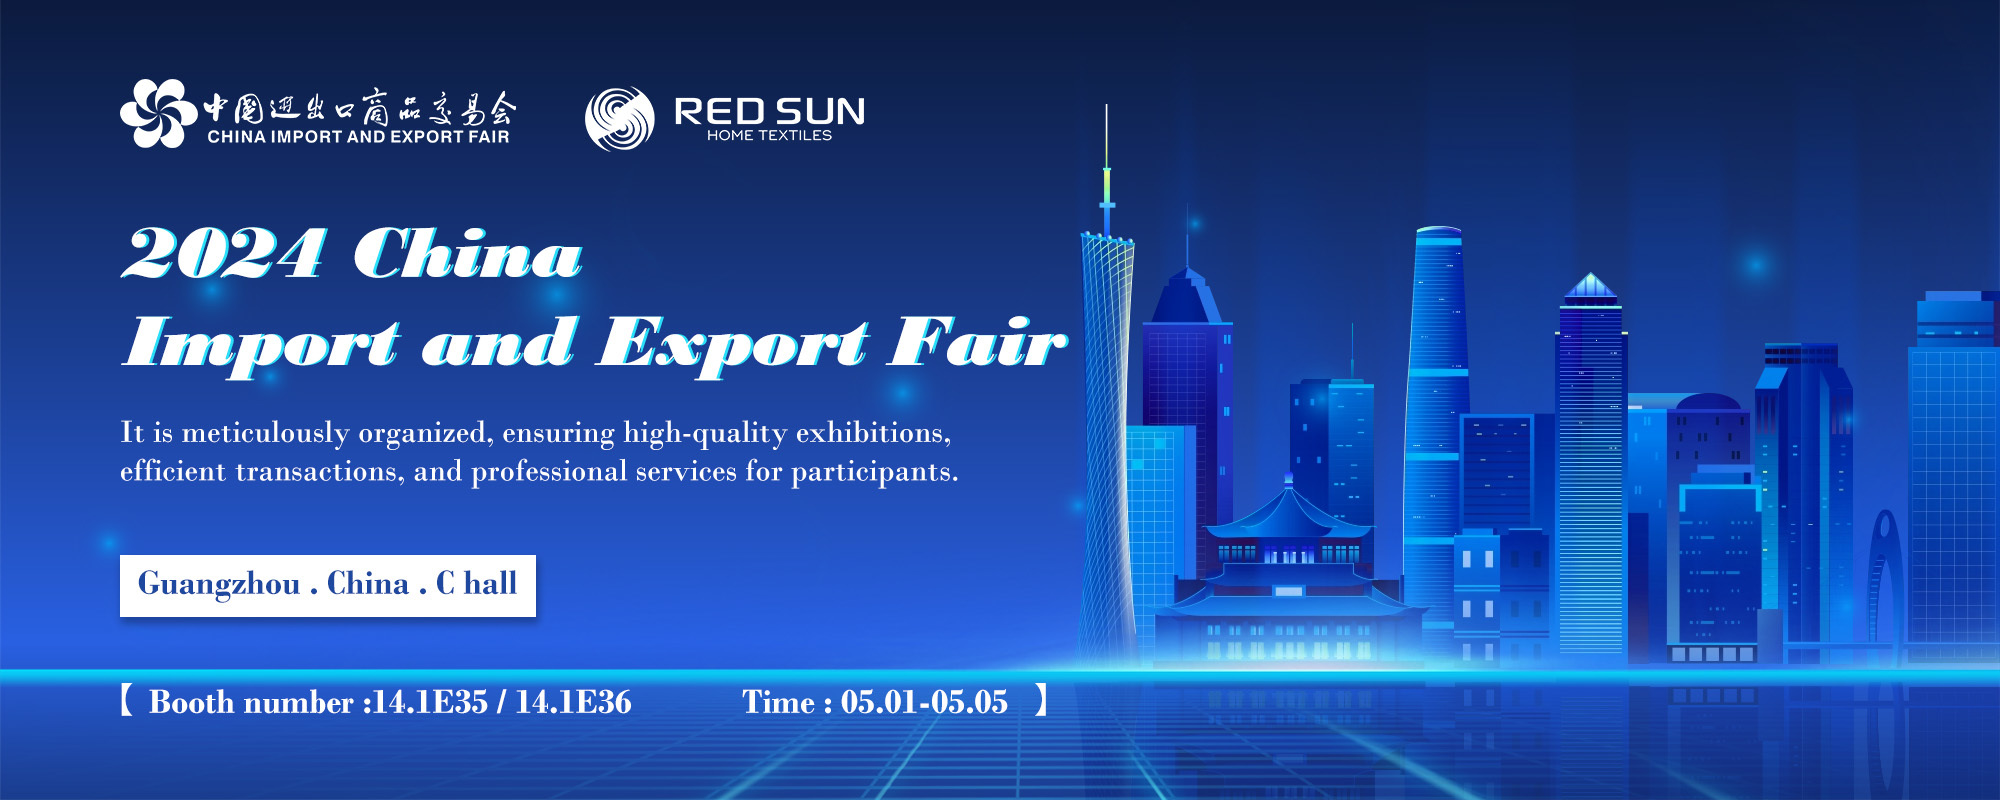 2024 China Import and Export Fair